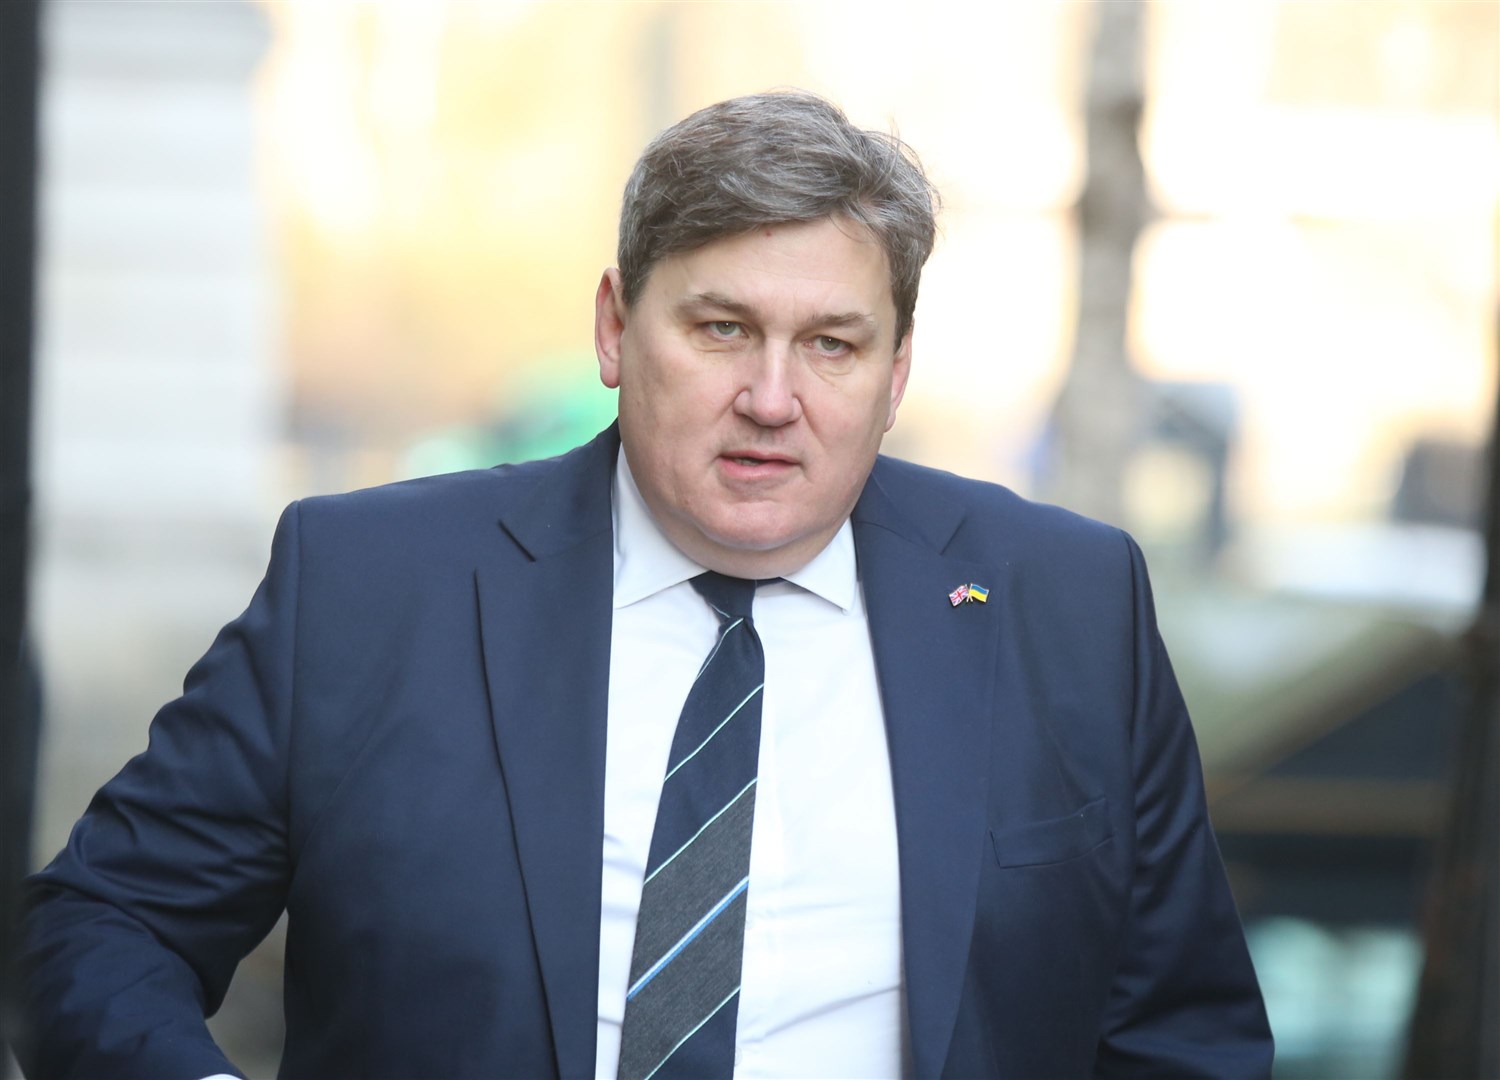 Kit Malthouse made his comments in response to concerns of a ‘cover-up’ in the Covid public inquiry (James Manning/PA)